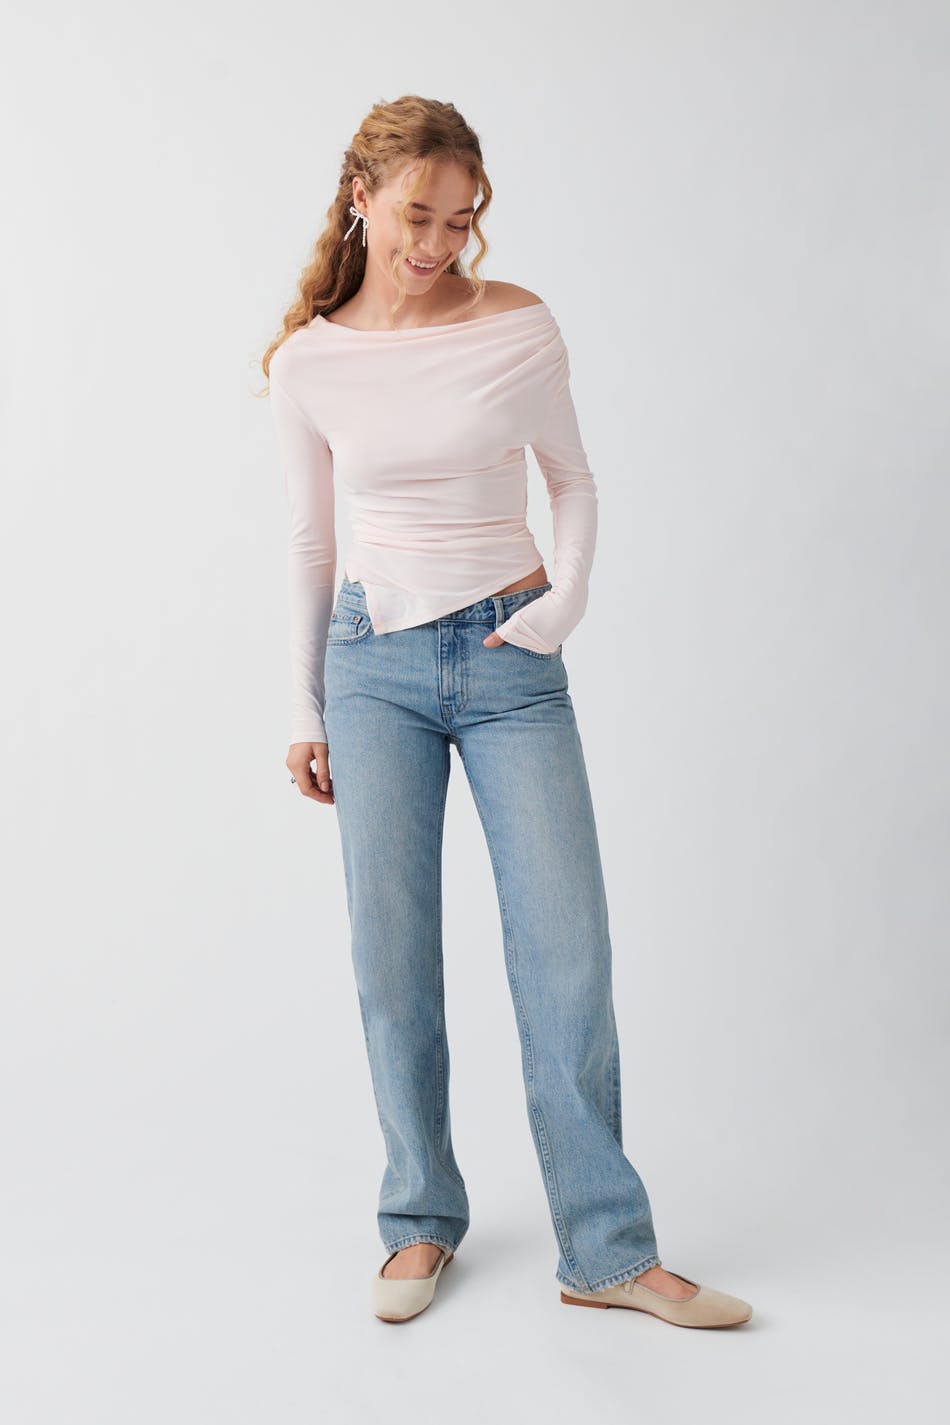  Gina Tricot- Low straight jeans - low waist jeans- Blue - 40- Female